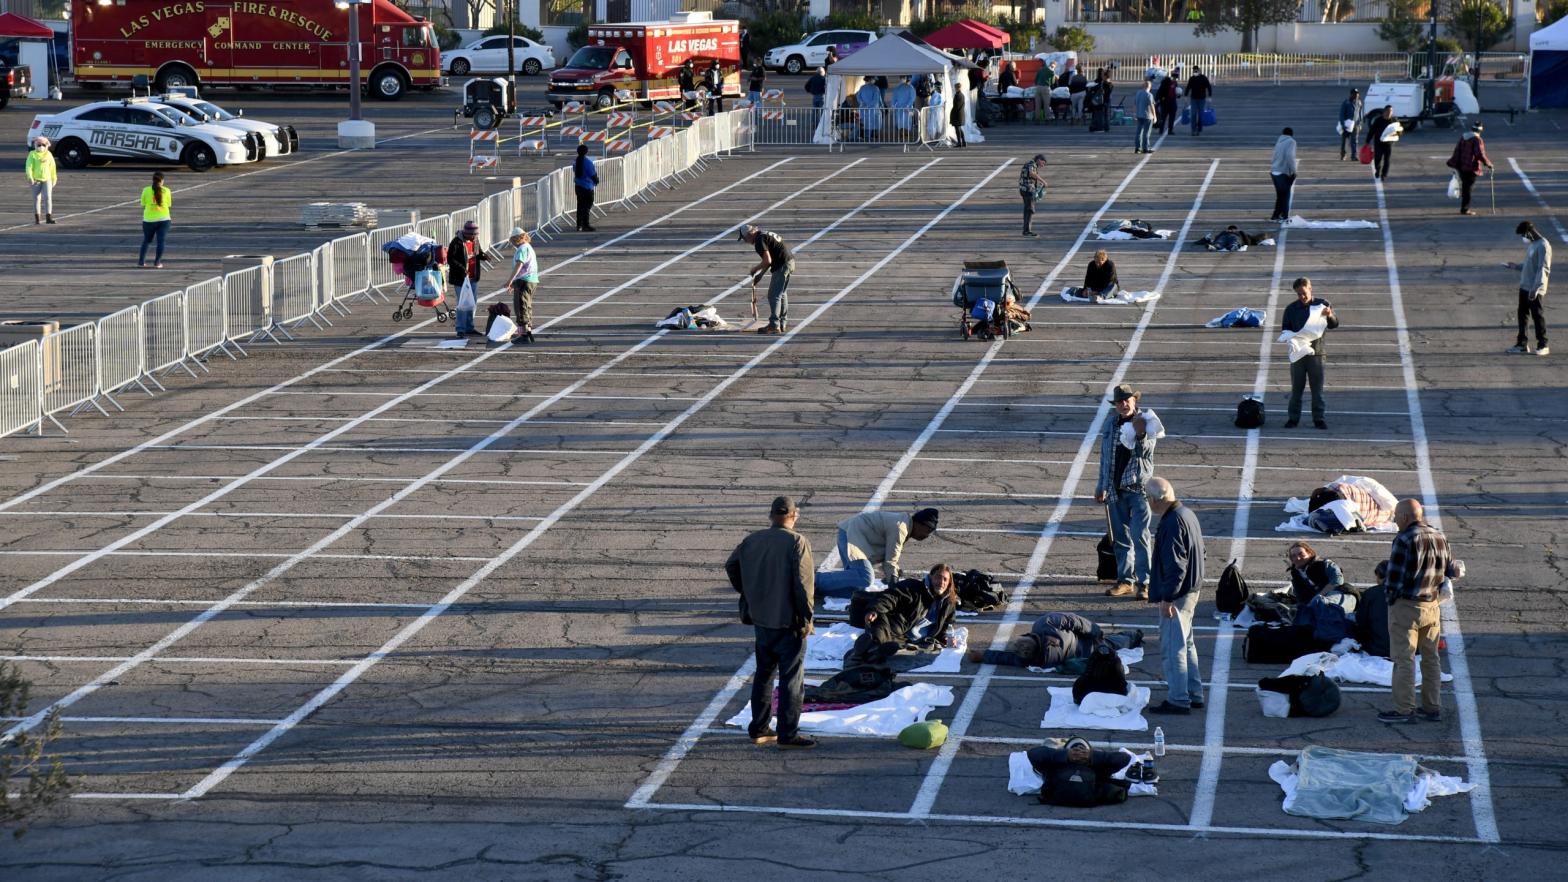 People arrive at a temporary homeless shelter with painted social-distancing boxes in a parking lot at Cashman Centre on March 30, 2020 in Las Vegas, Nevada. (Photo: Ethan Miller, Getty Images)